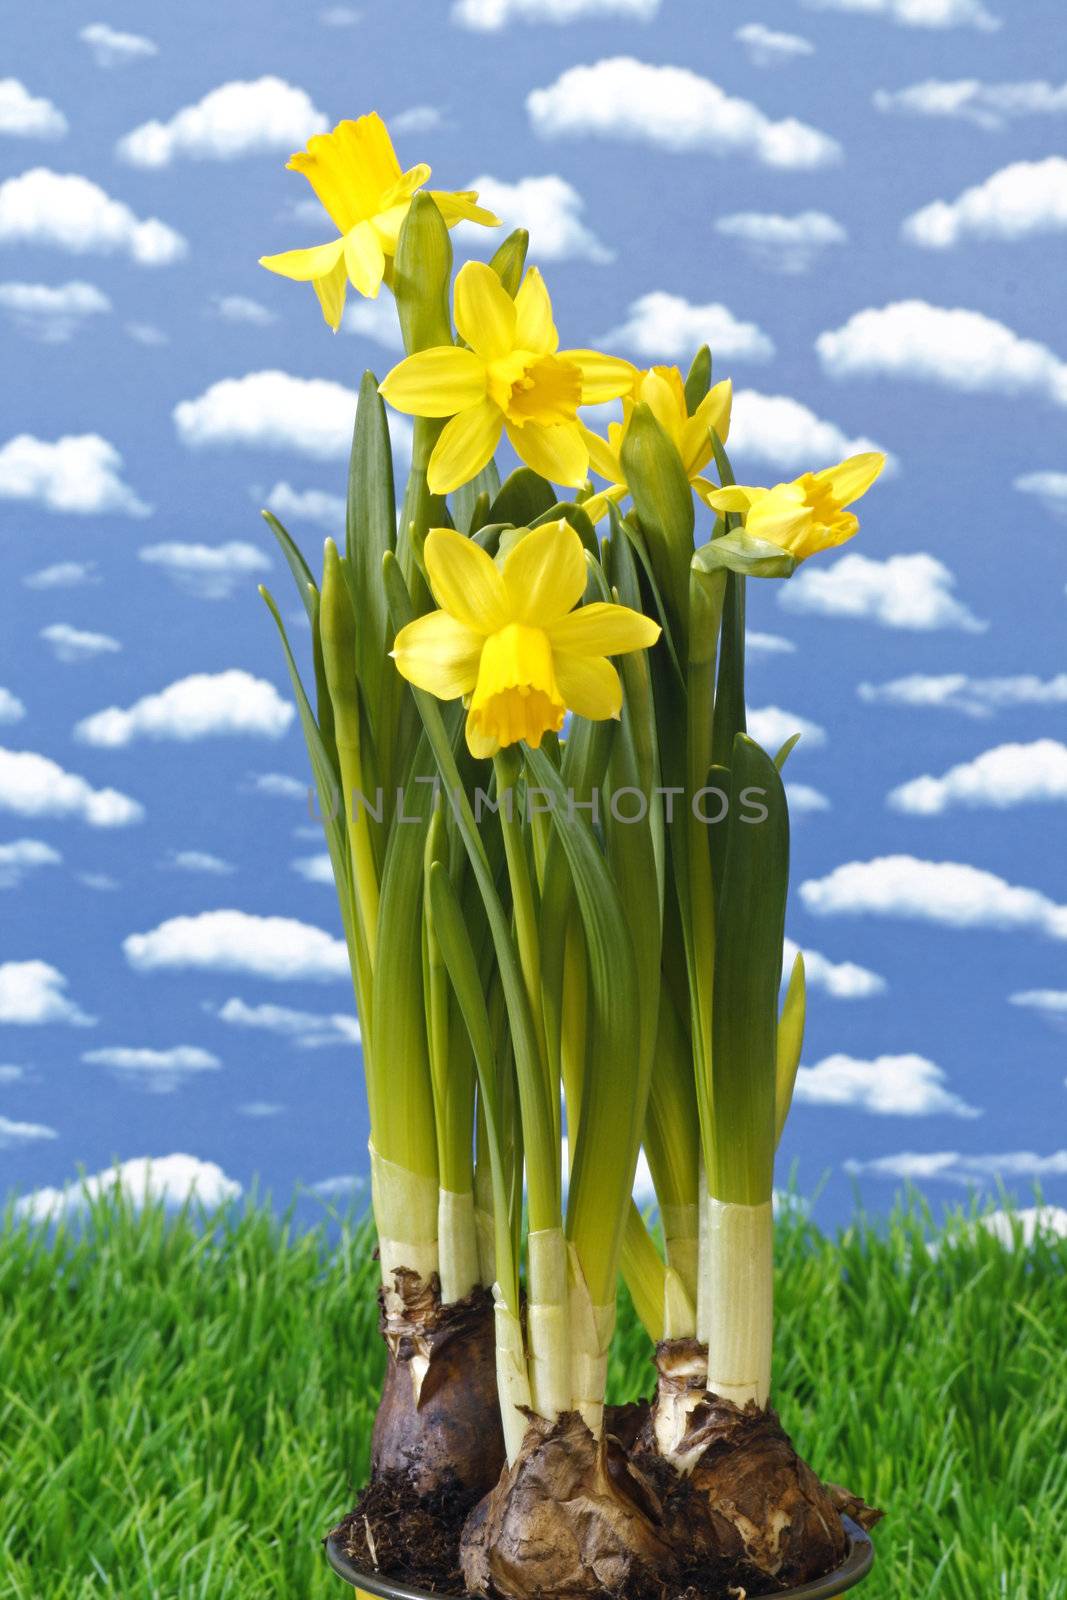 Close-up of daffodils on grass over blue background